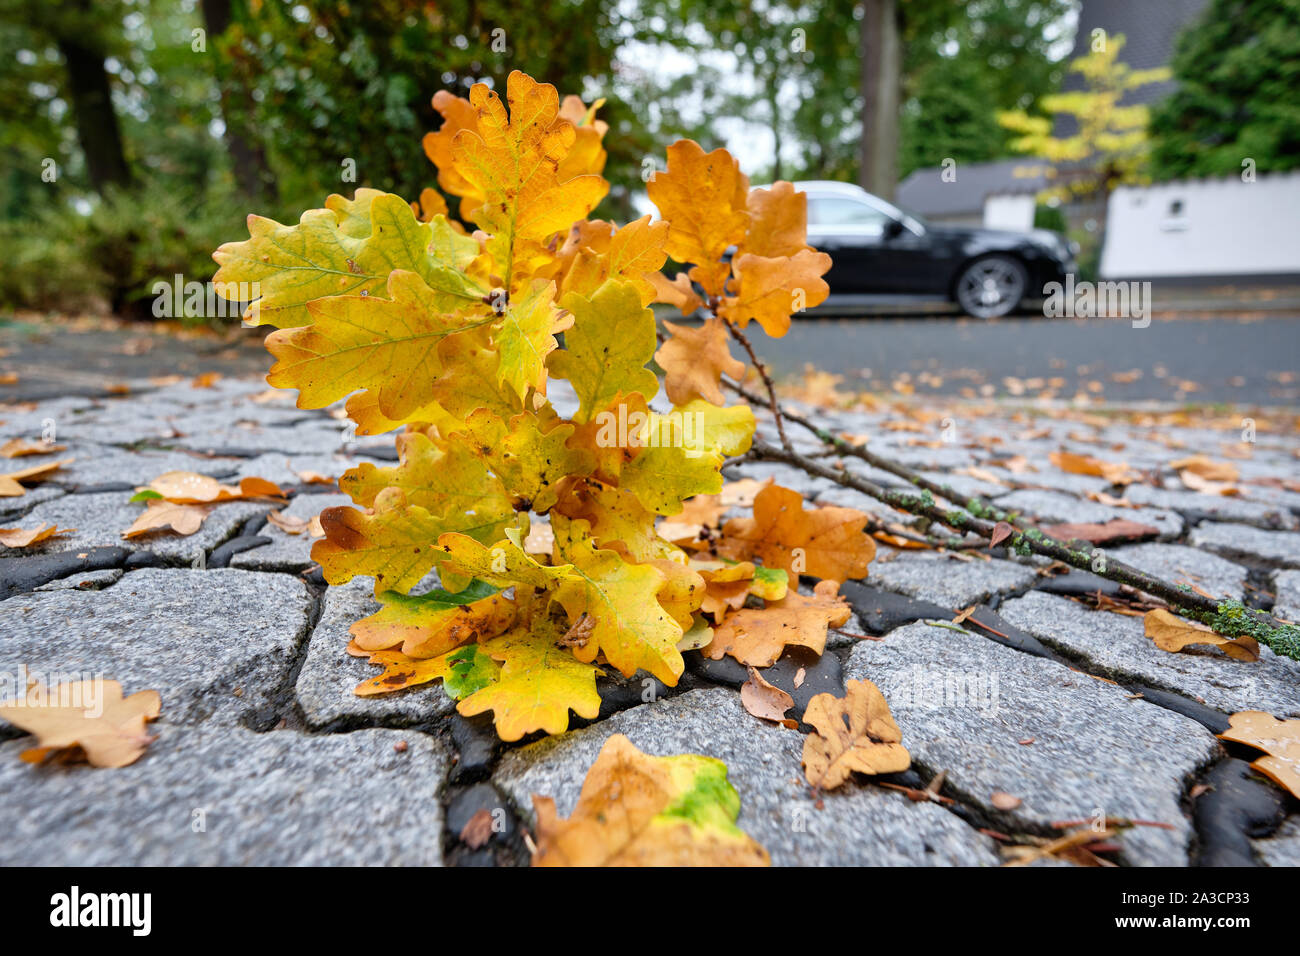 Nuremberg, Germany - October 05, 2019: Wet yellow autumn leaves of an oak tree are lying on the pavement in a residental district with a car parking i Stock Photo